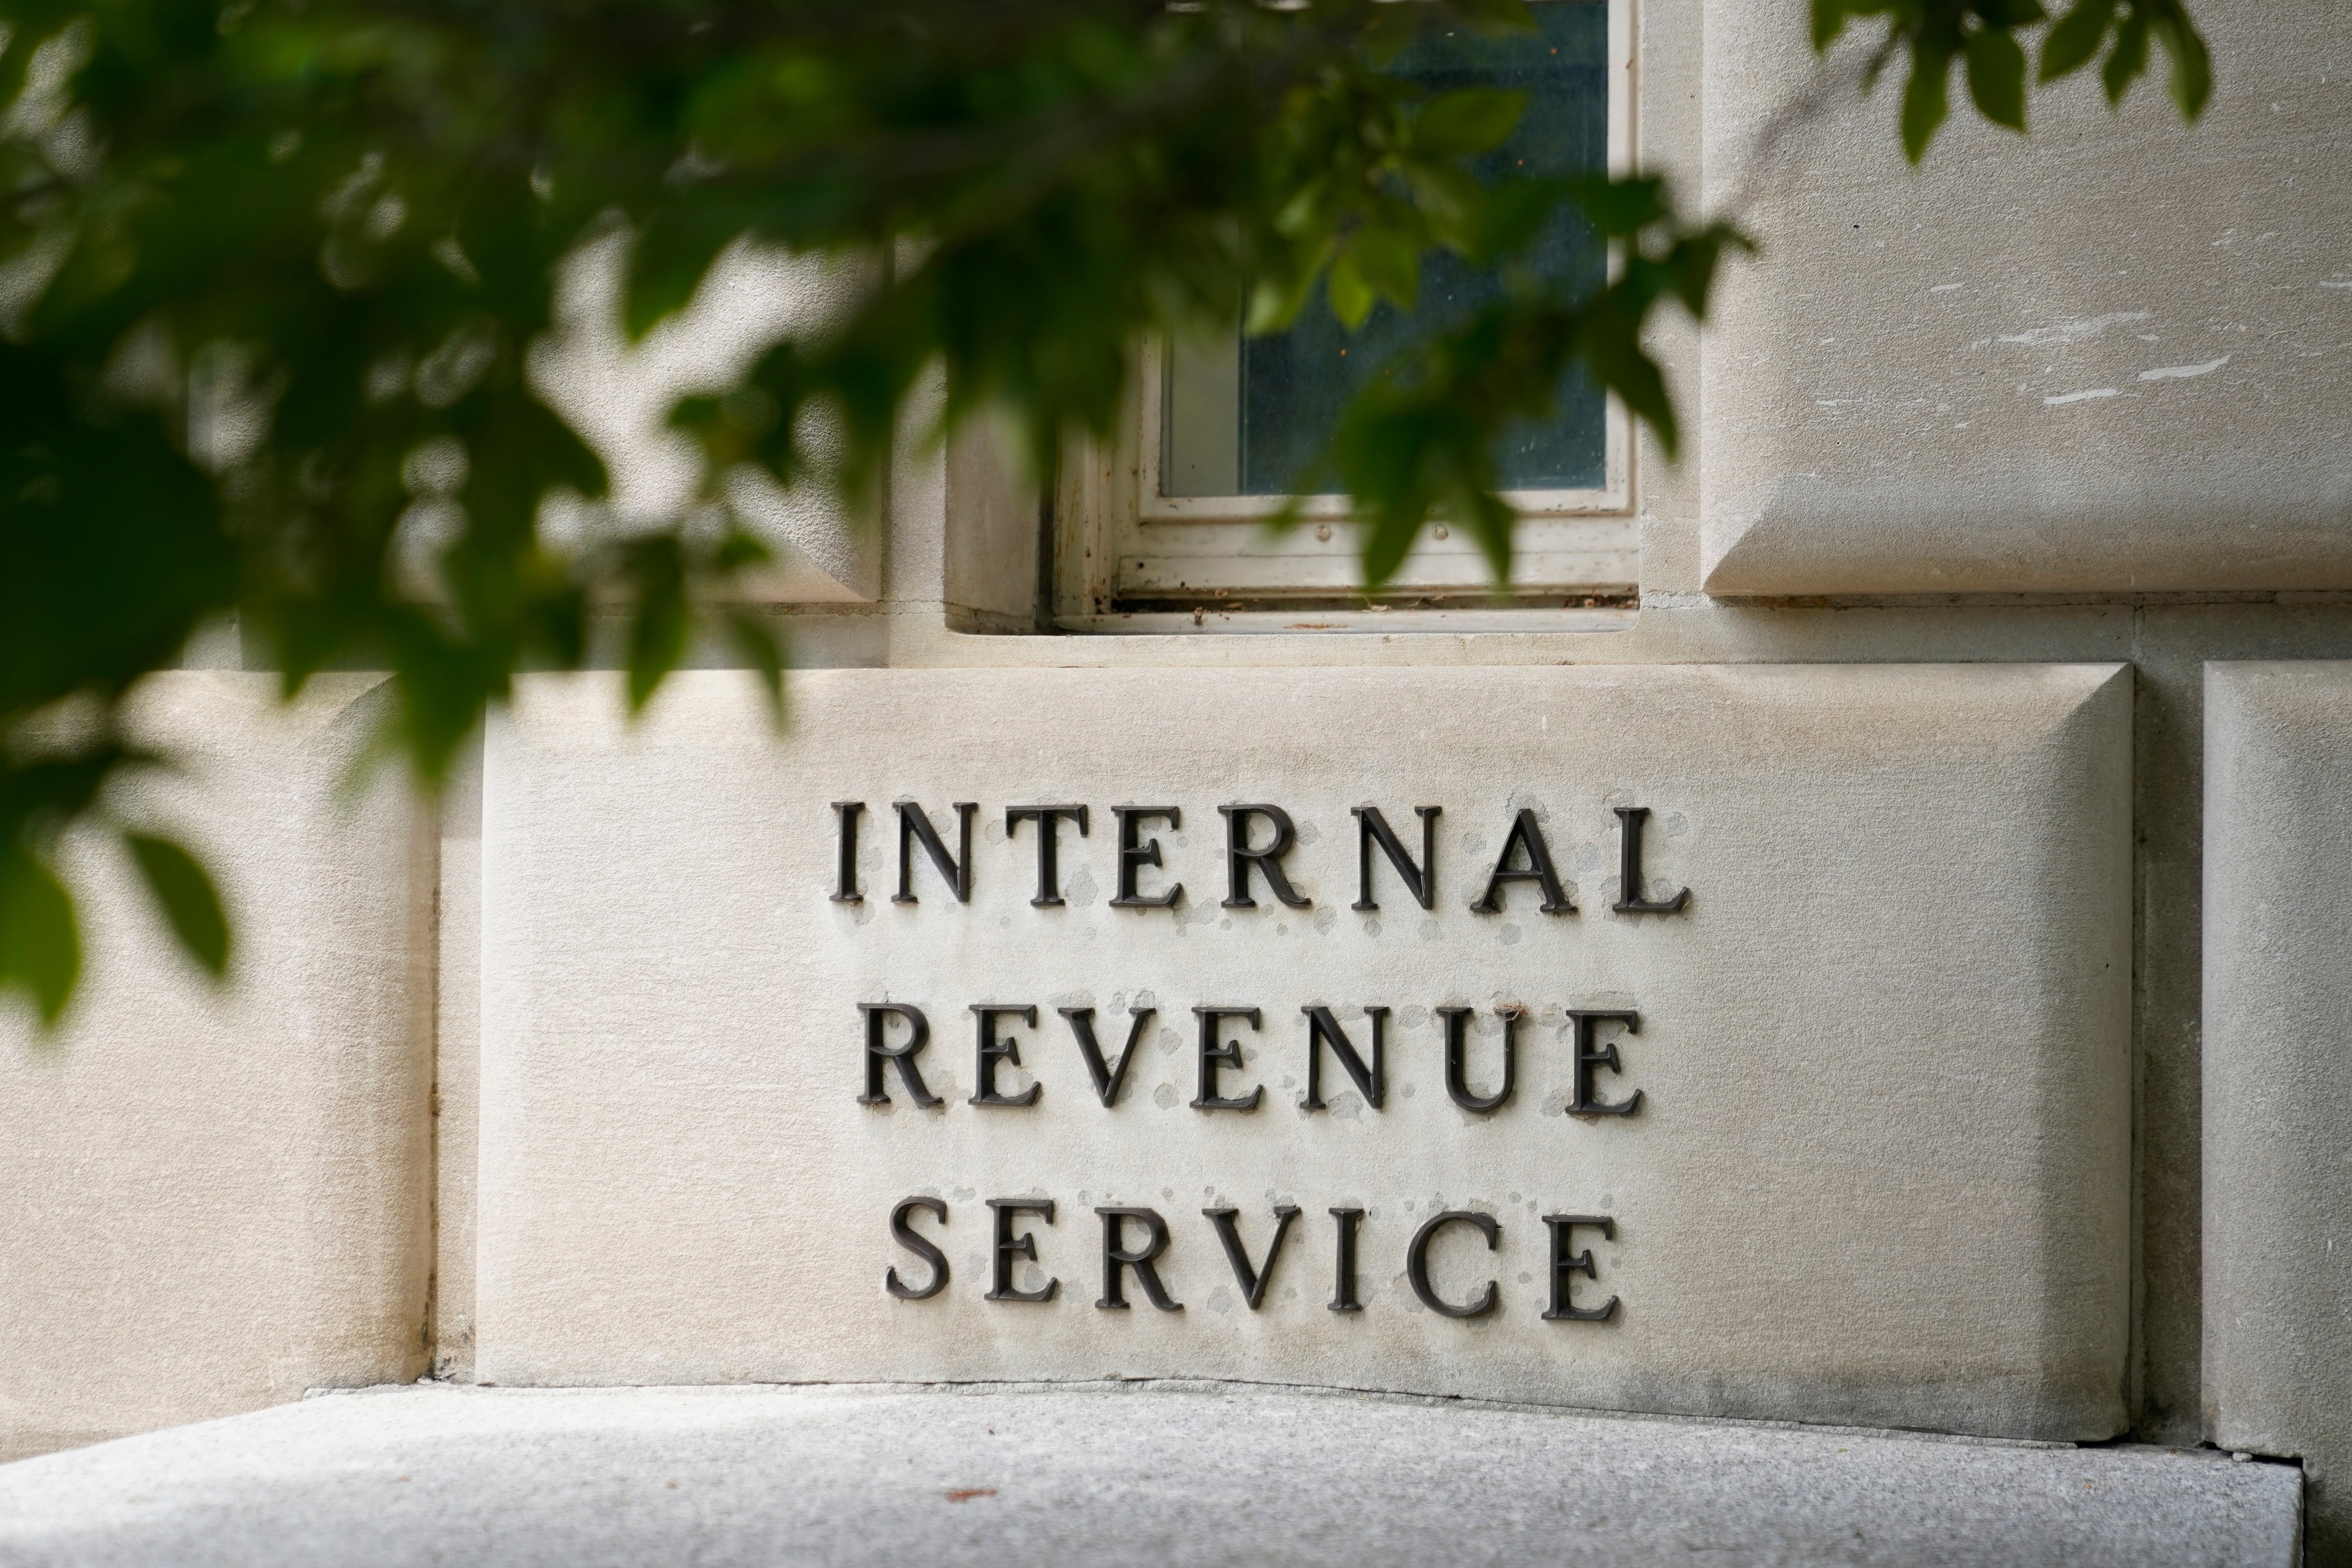 Some financial groups that advocate for a more fiscally conservative agenda welcomed Friday’s decision to limit agency oversight, such as those from the IRS